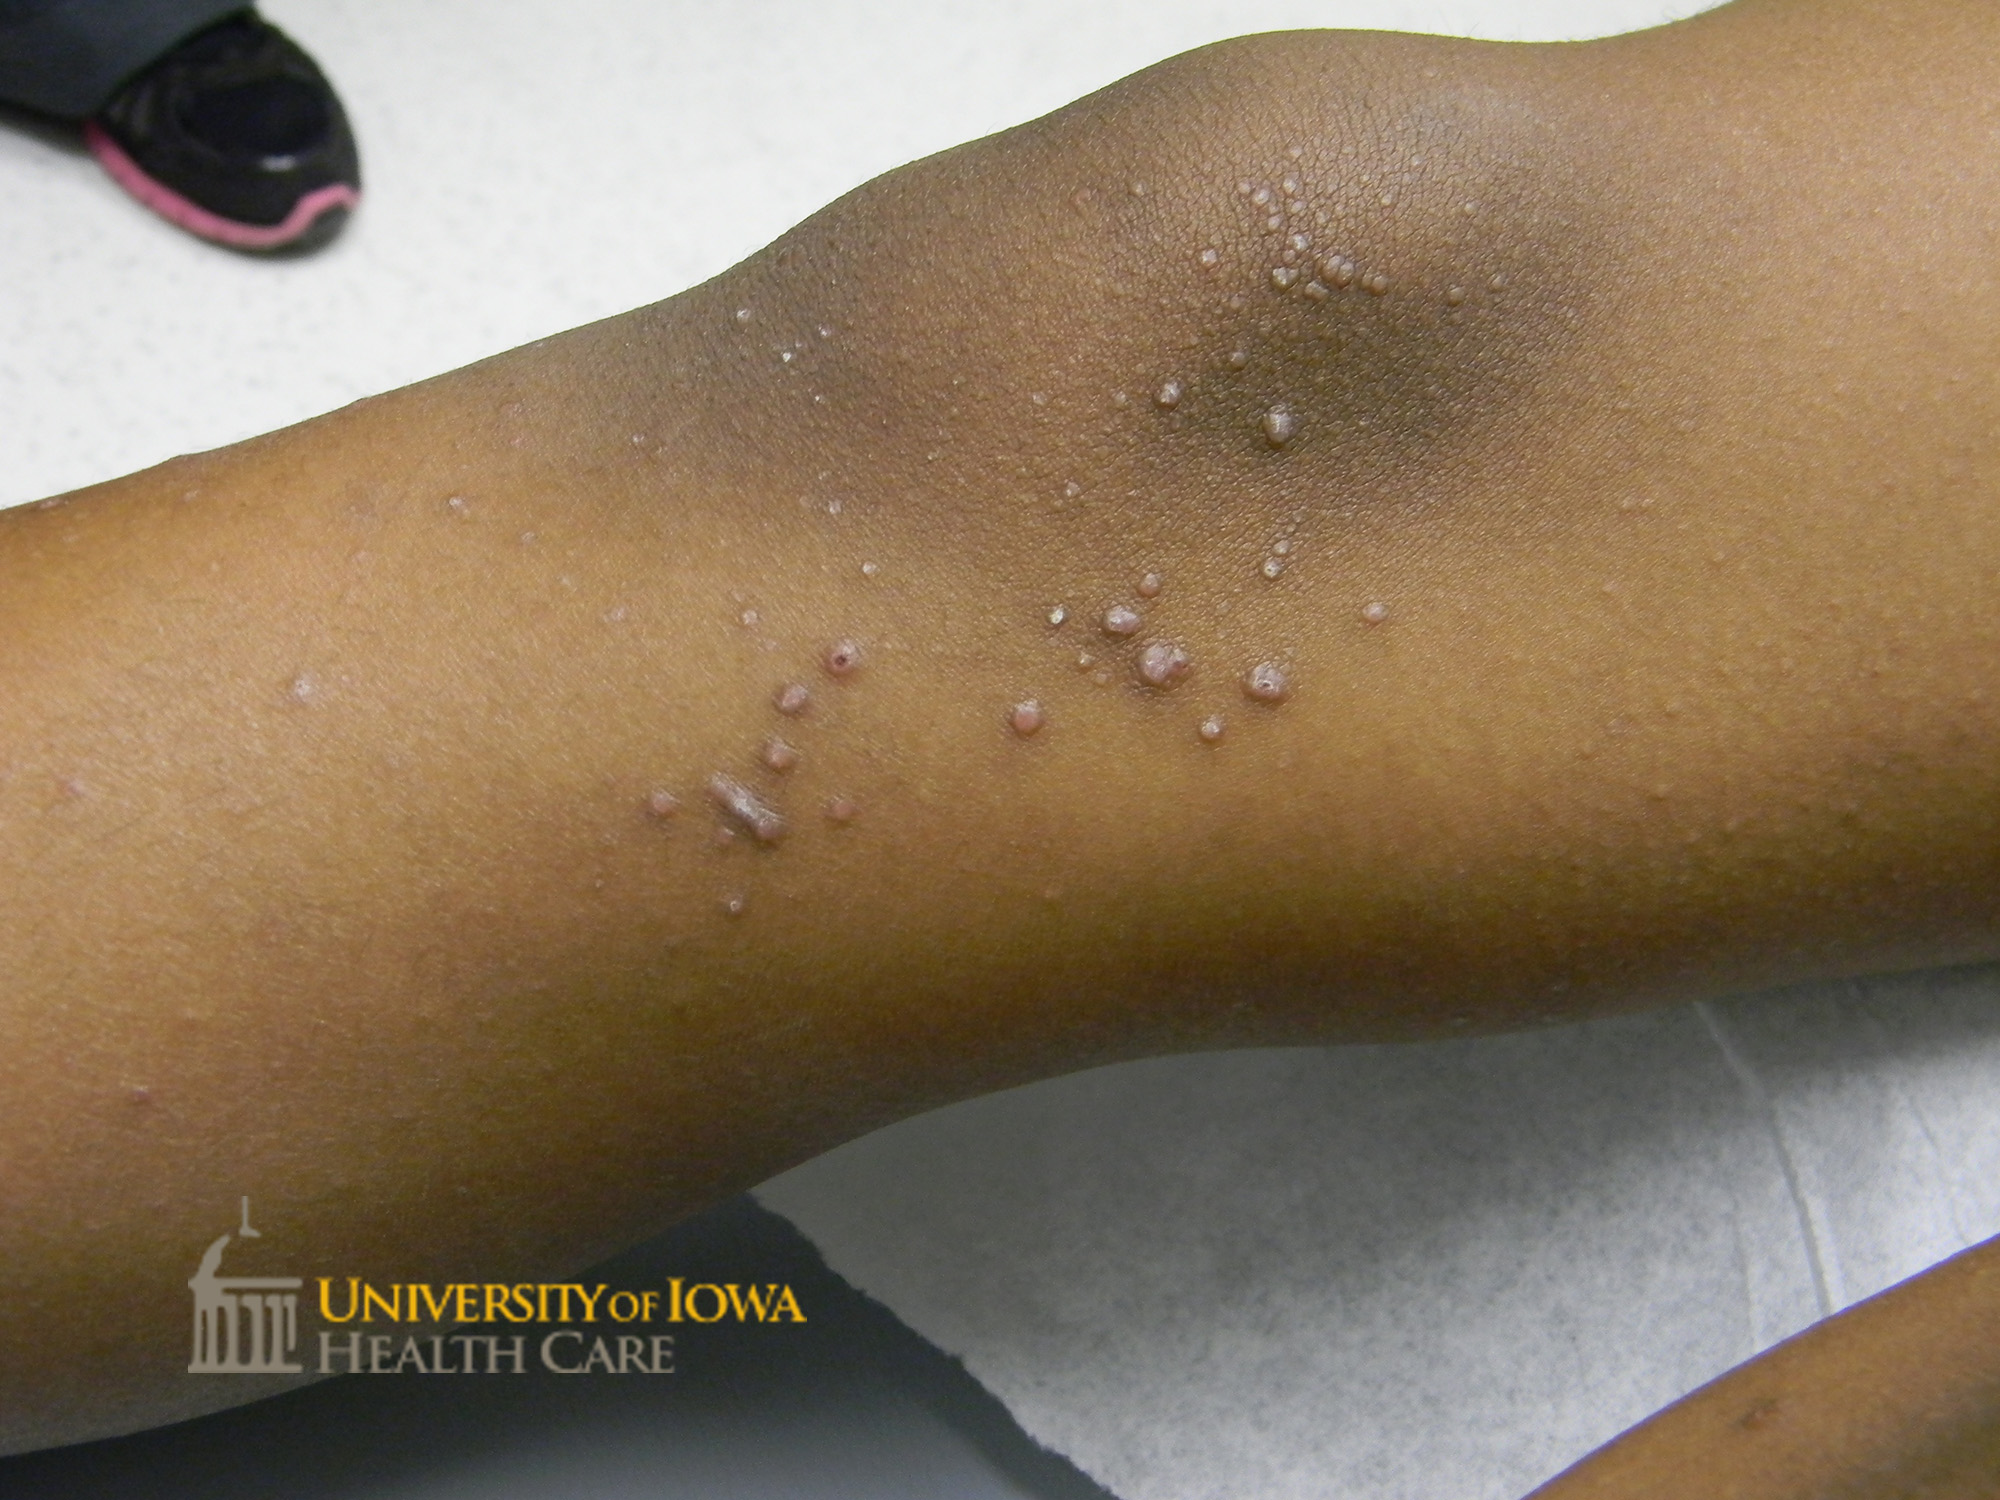 Pink to violaceous polygonal papules with overlying white scale on the lower legs. (click images for higher resolution).